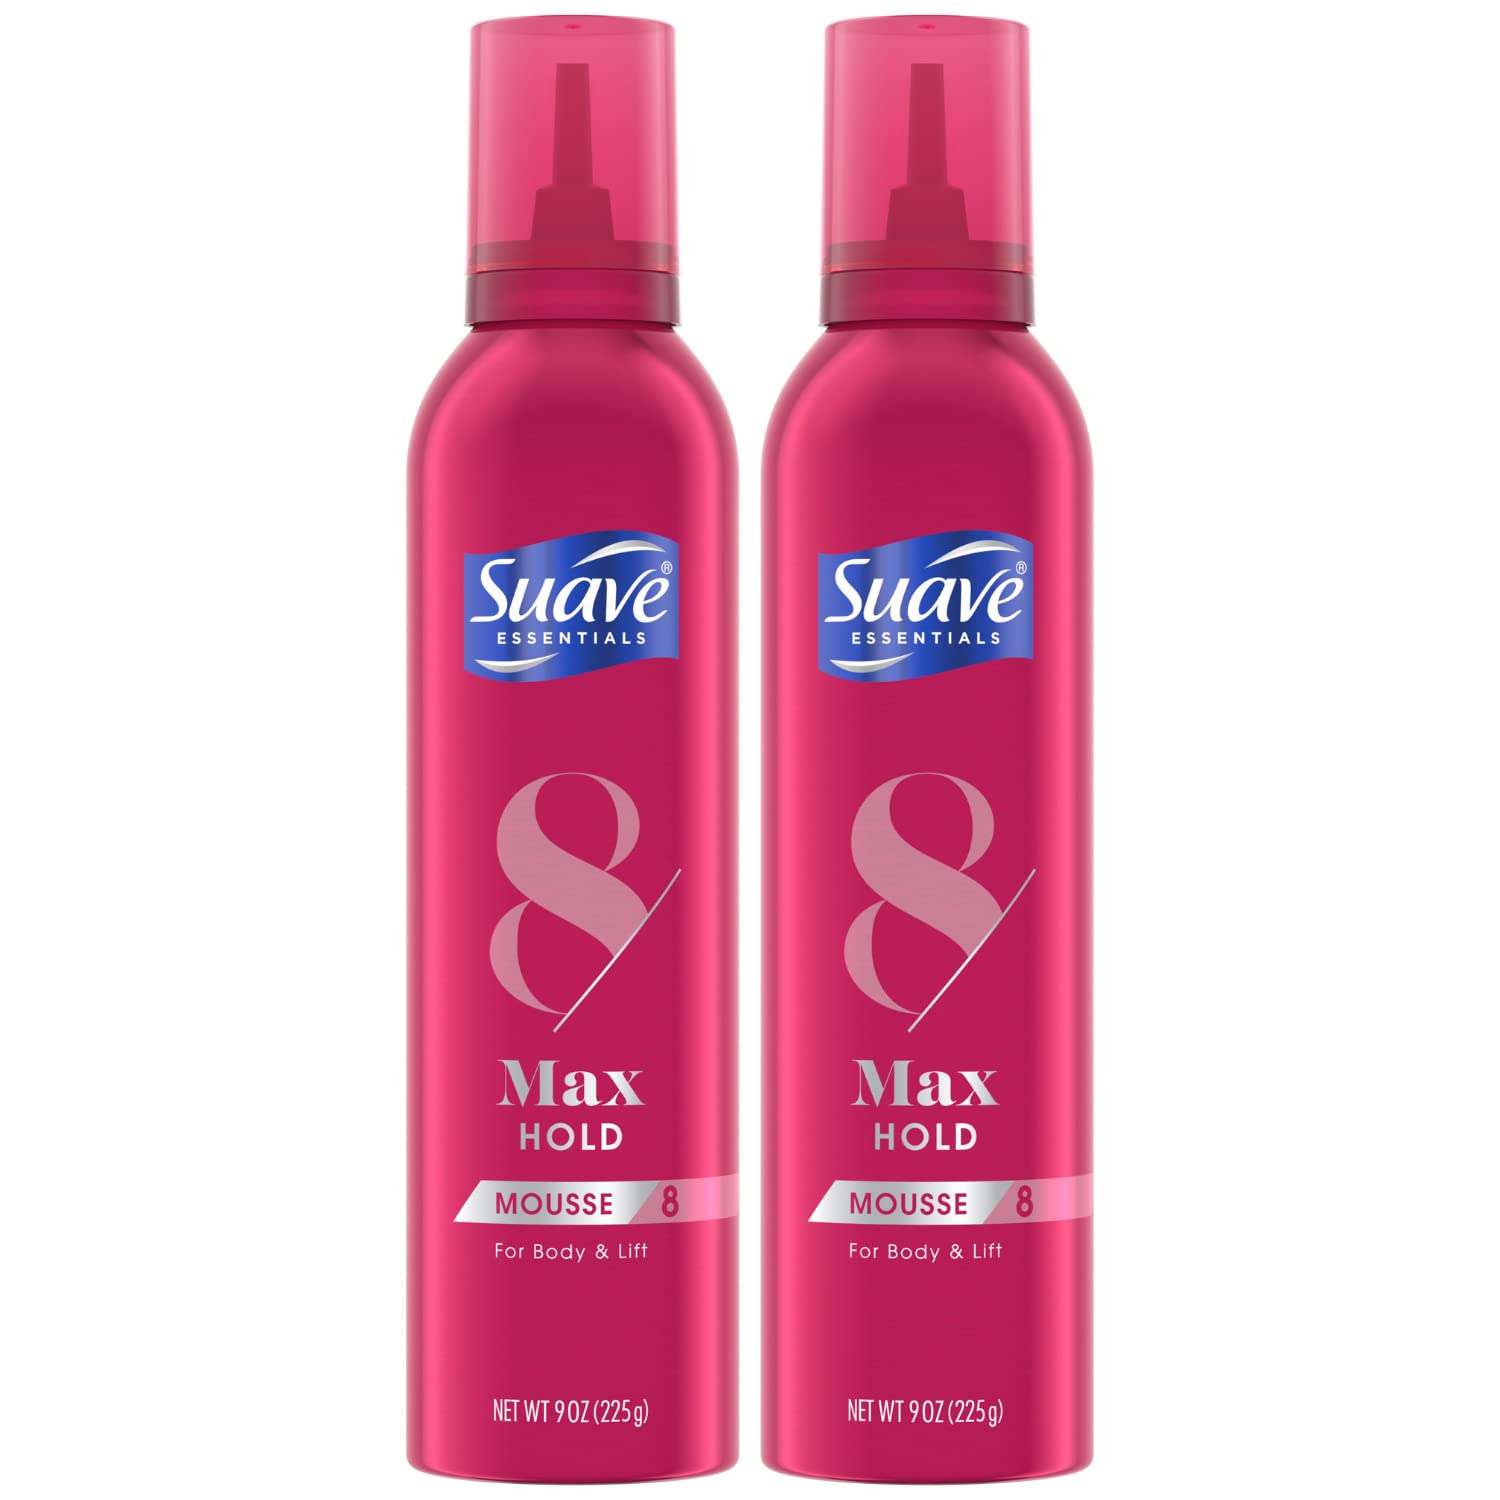 Suave Mousse, Max Hold 8 – Volumizing Hair Mousse for Fine Hair, Wavy & Curly Hair Care, Moisturizing & Nourishing Volume Mousse Hair Foam, 9 Oz (Pack of 2)